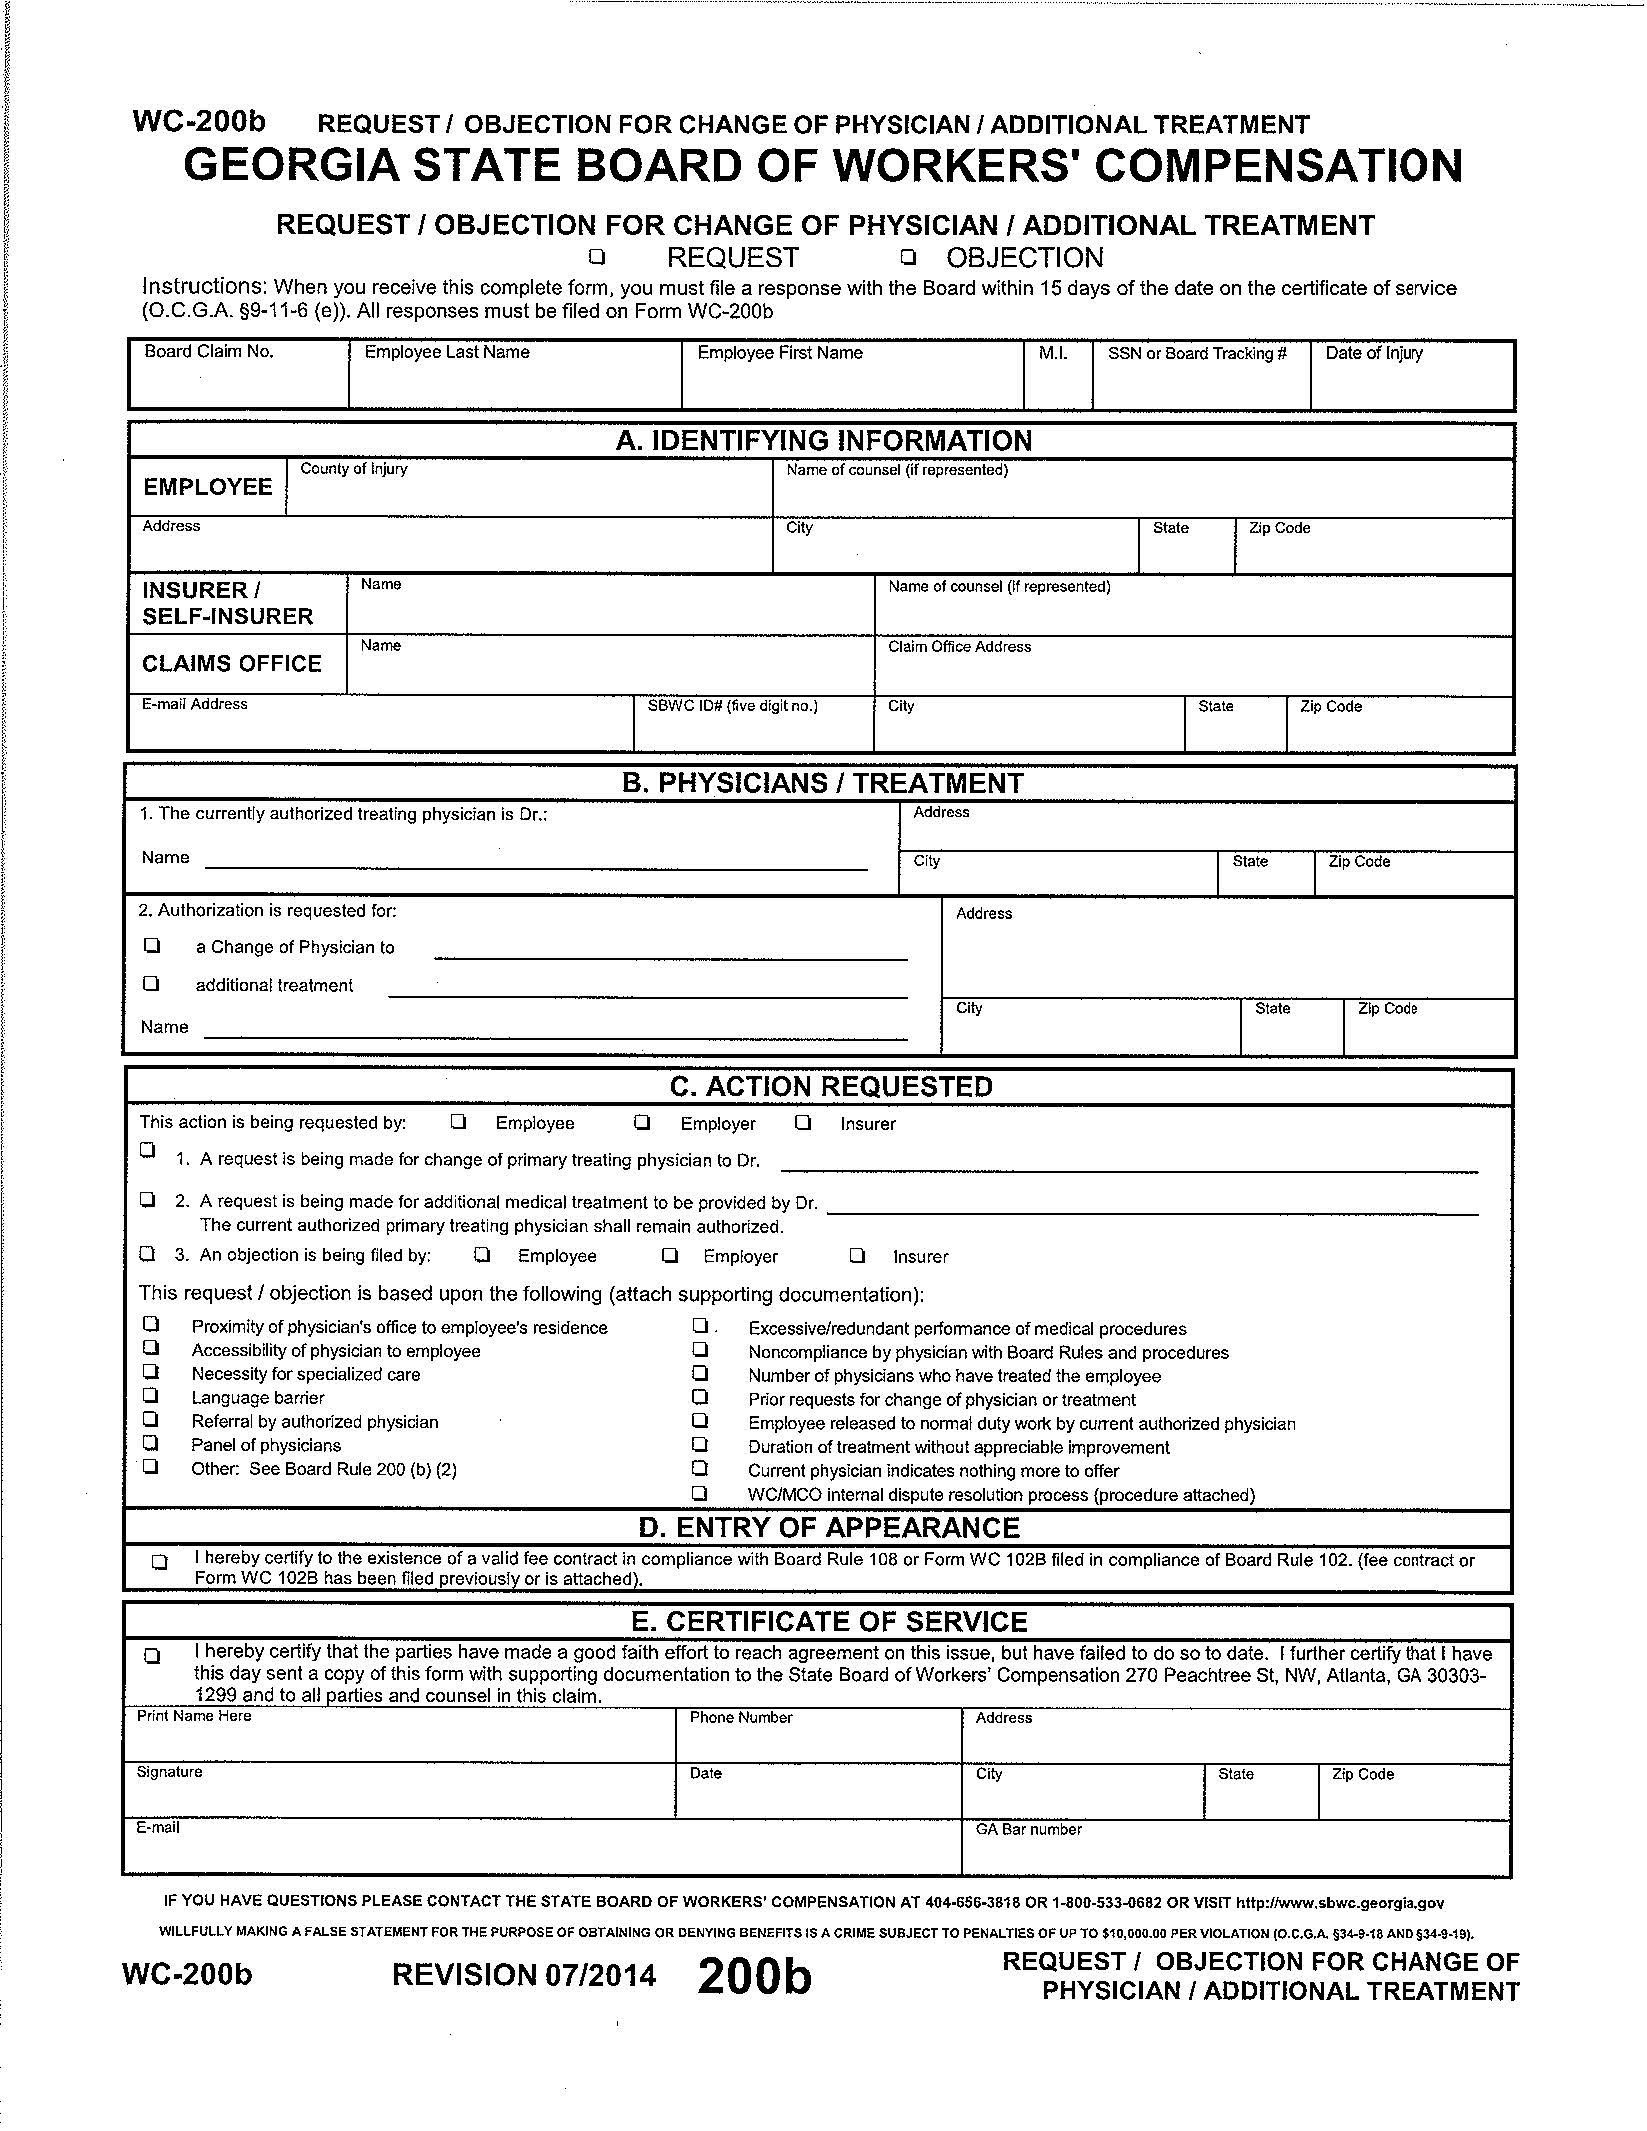 GA Workers p Medical Treatment Forms WC 200 WC 205